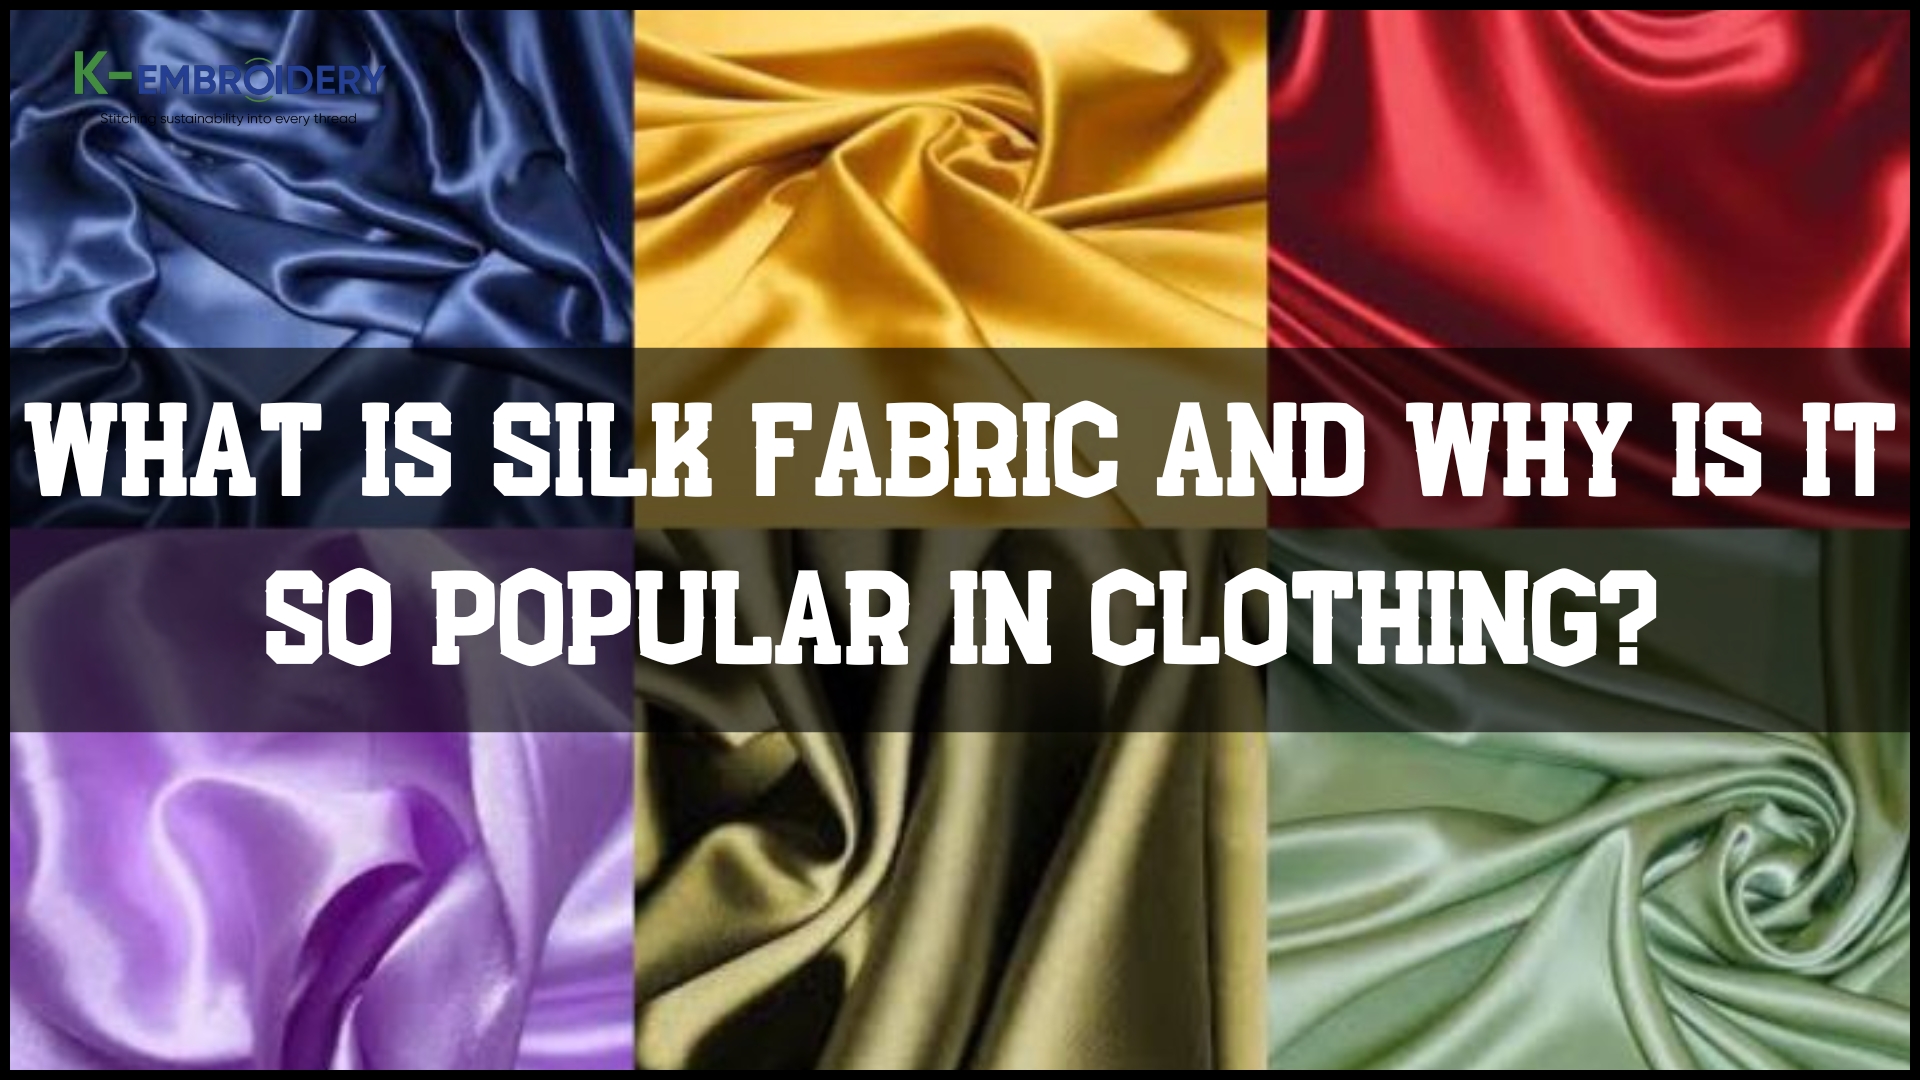 What is silk fabric and why is it so popular in clothing?